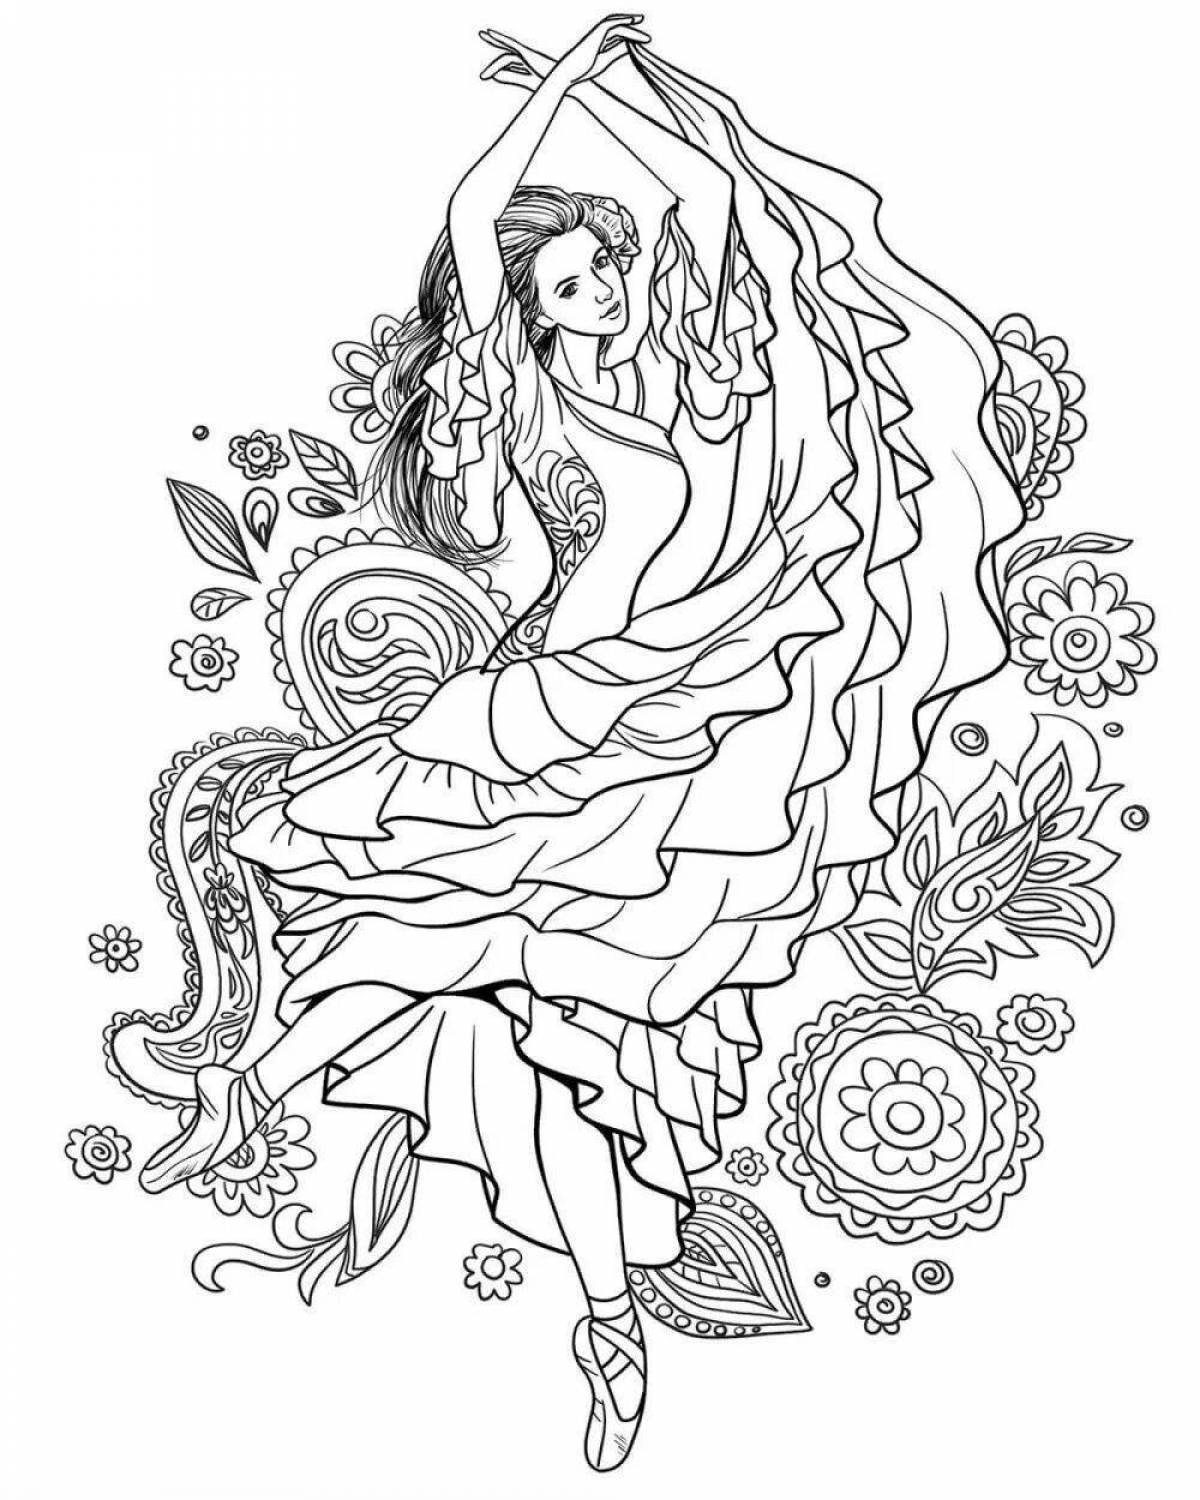 Coloring page graceful dancing girl